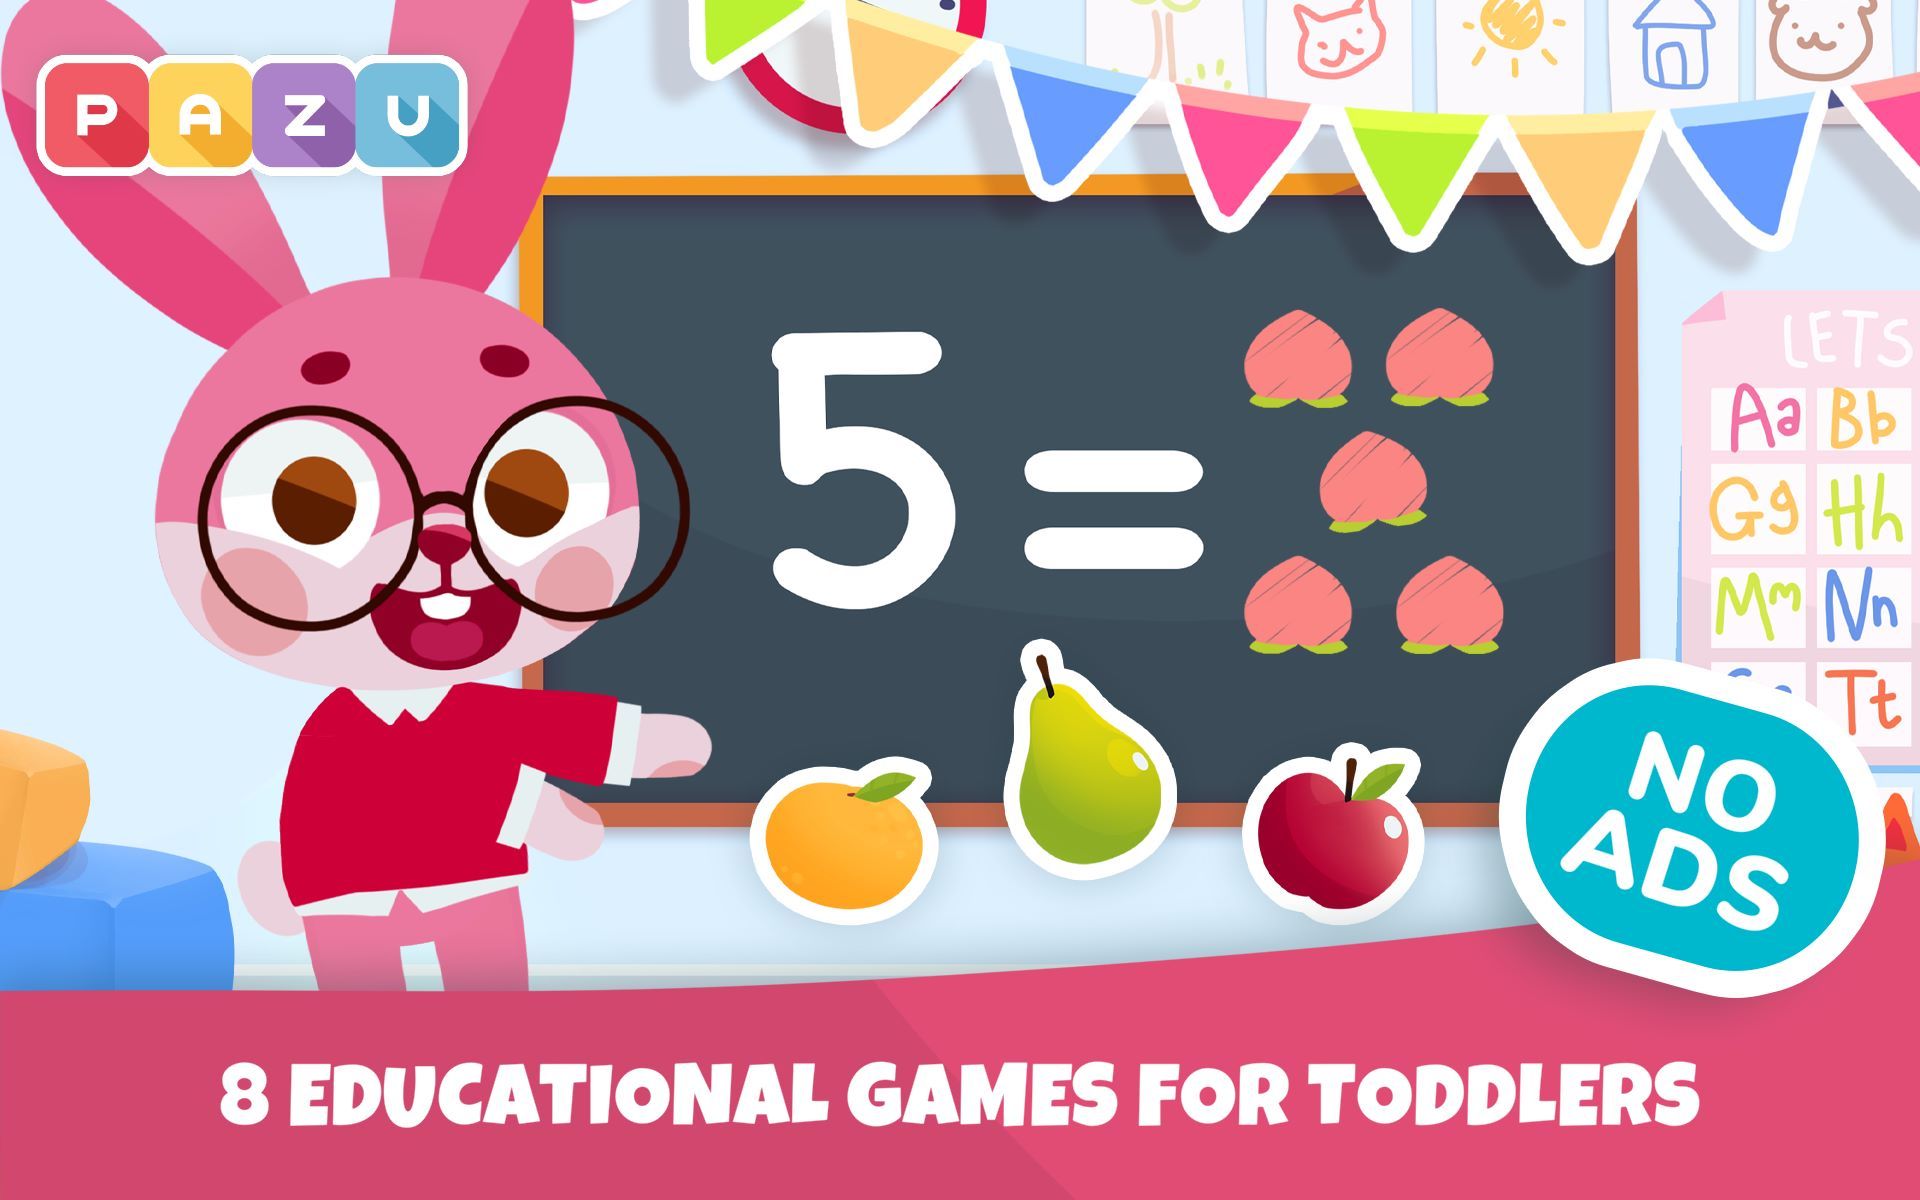 Learning Games for kids and toddlers | Pazu Mini